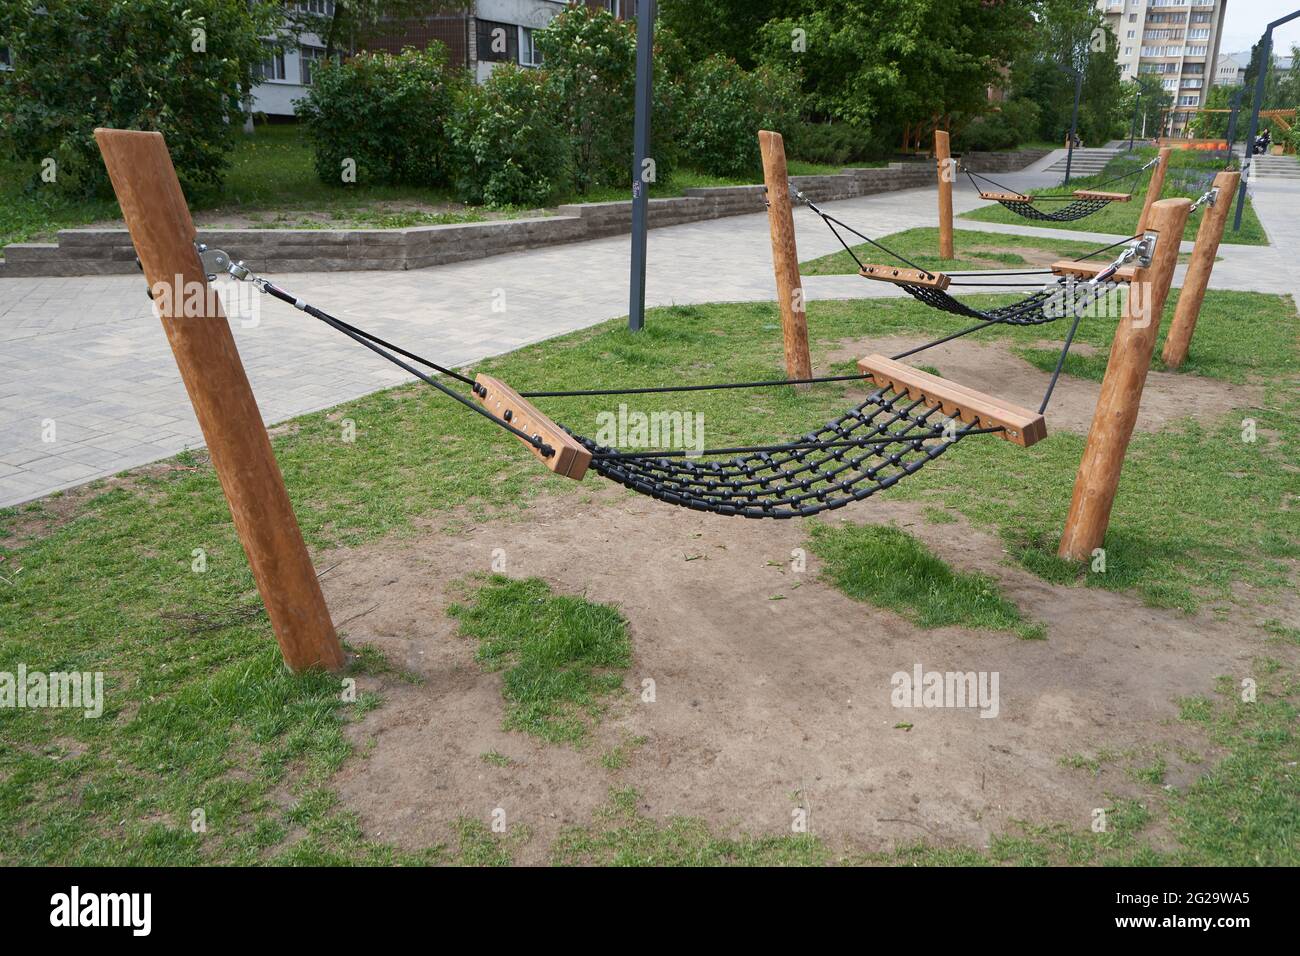 Hammocks for rest in the city, city improvement concept for people Stock Photo